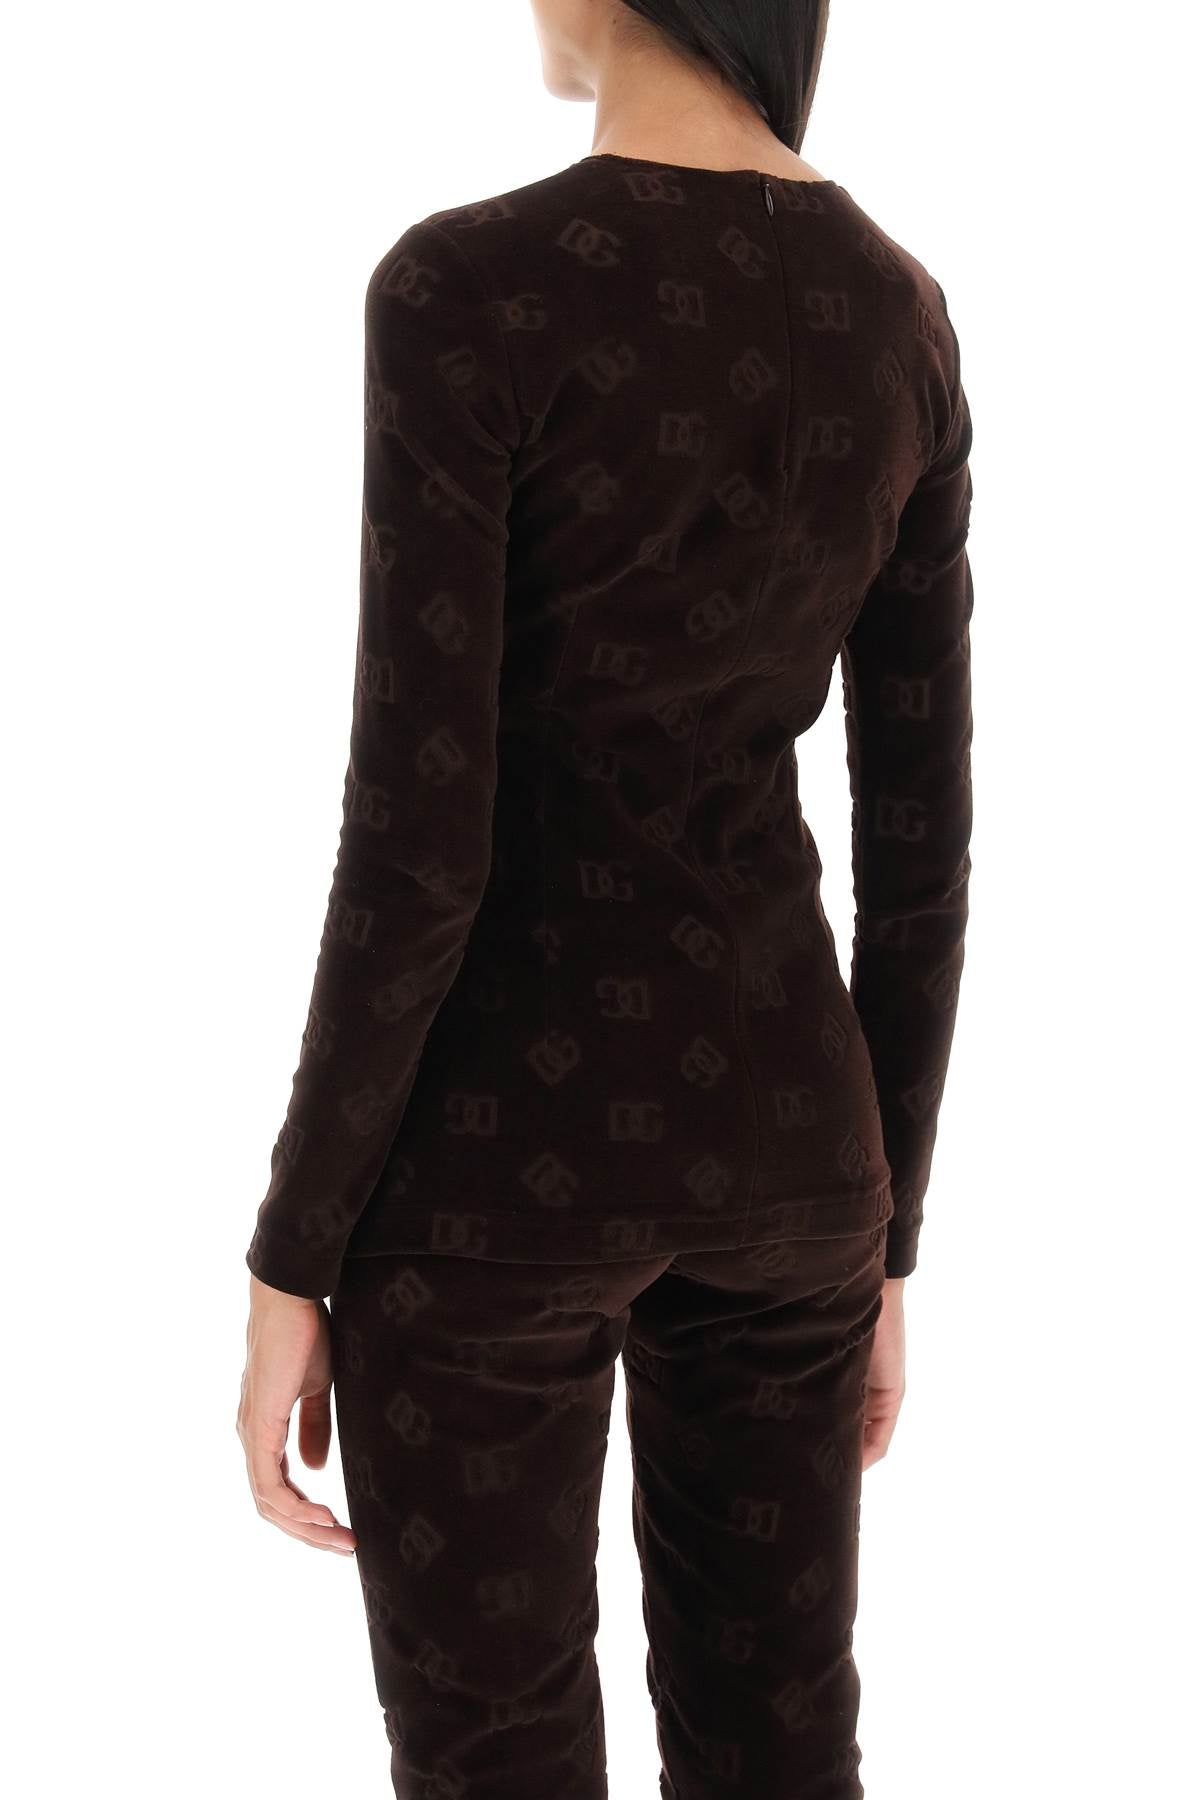 DOLCE & GABBANA Stylish Monogram Chenille Long-sleeved Top for Women - FW23 Collection